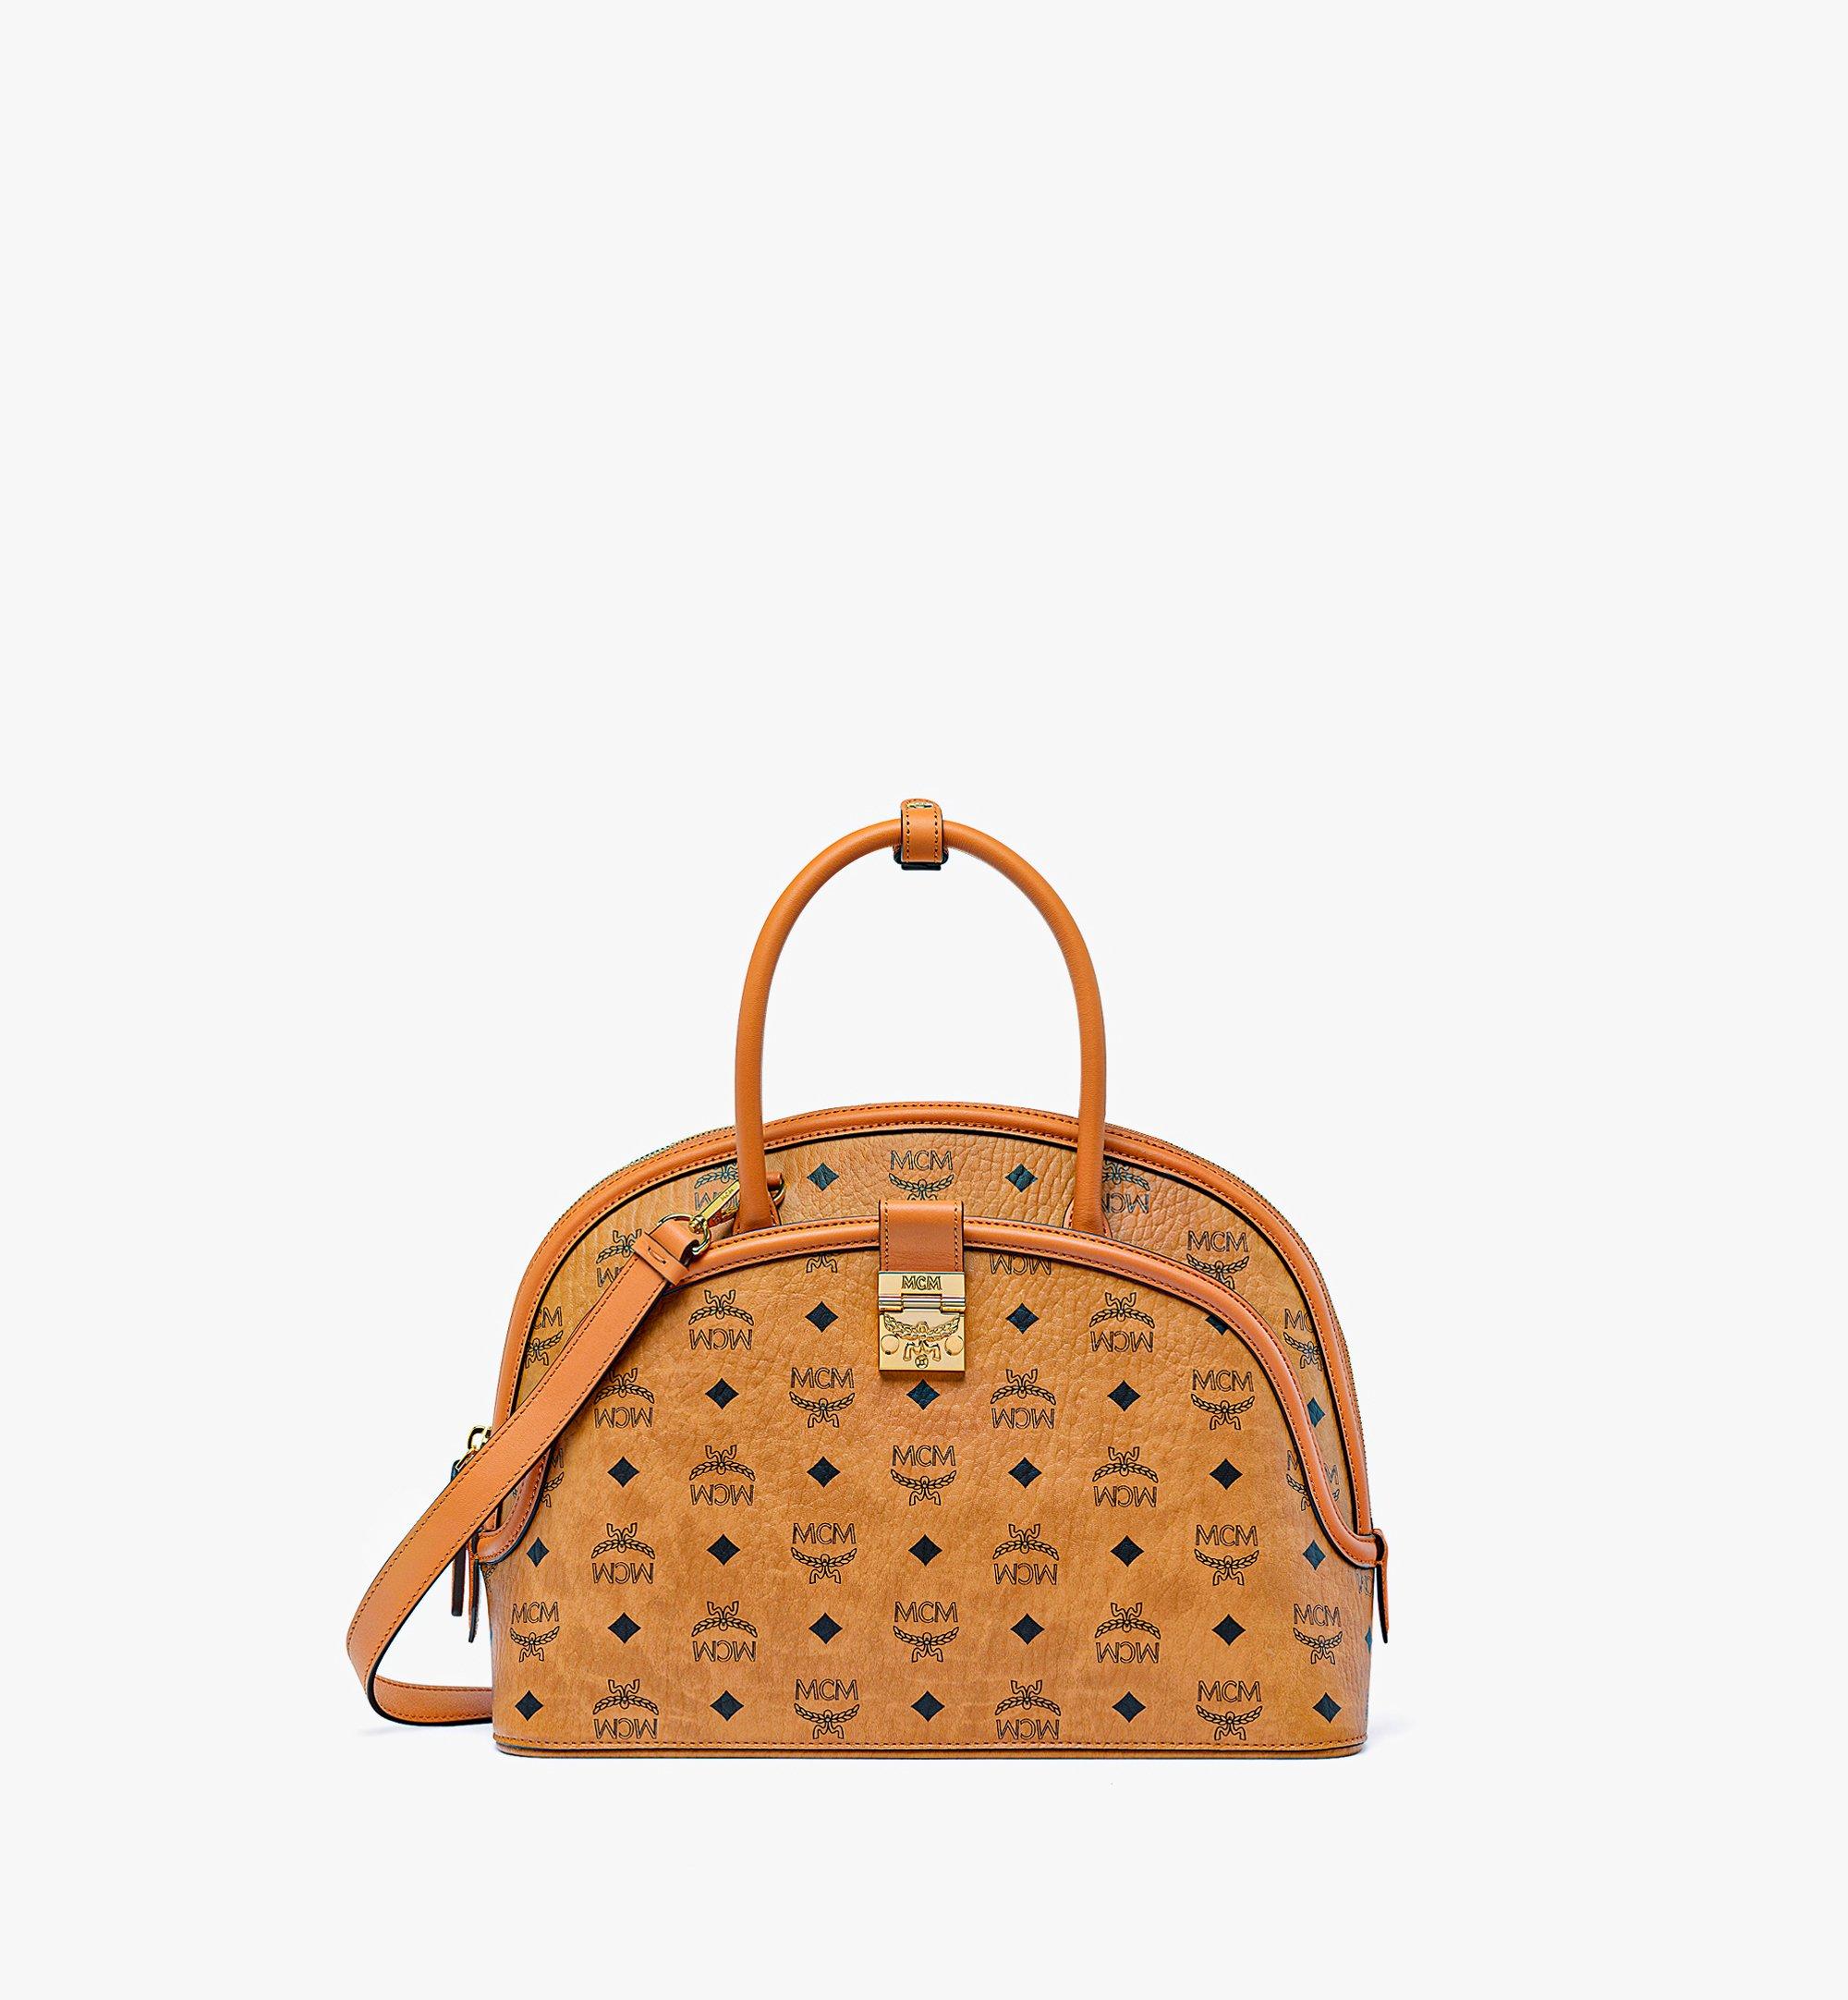 MCM Tracy Tote in Visetos Cognac MWTBSNN01CO001 Alternate View 1